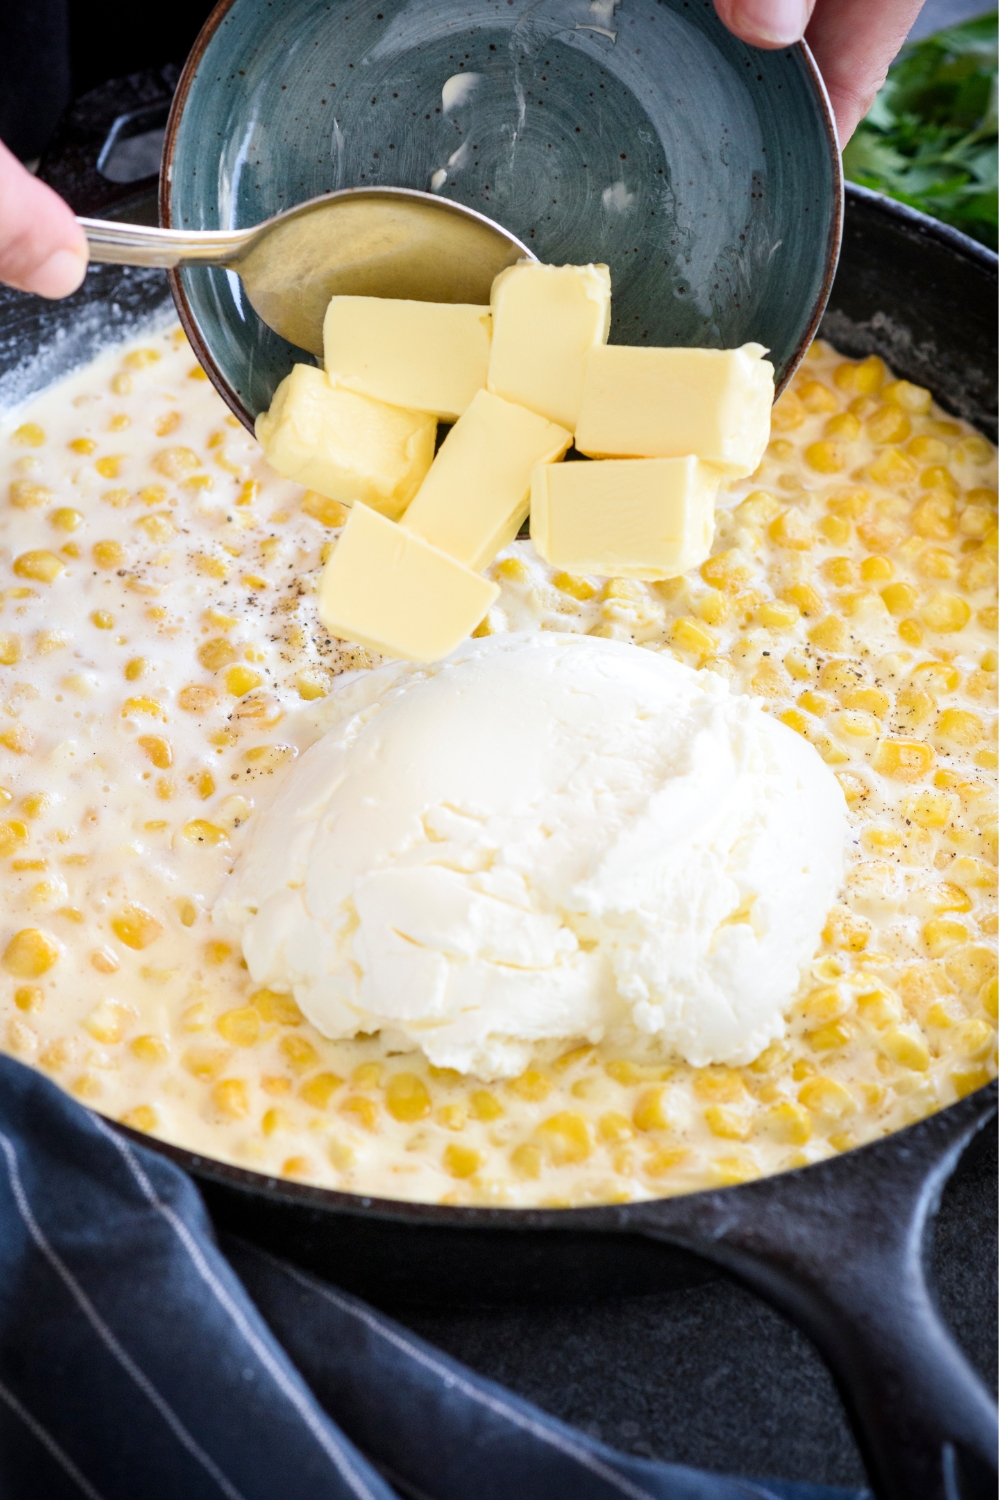 Knobs of butter being added to a skillet of corn, cream, and cream cheese.